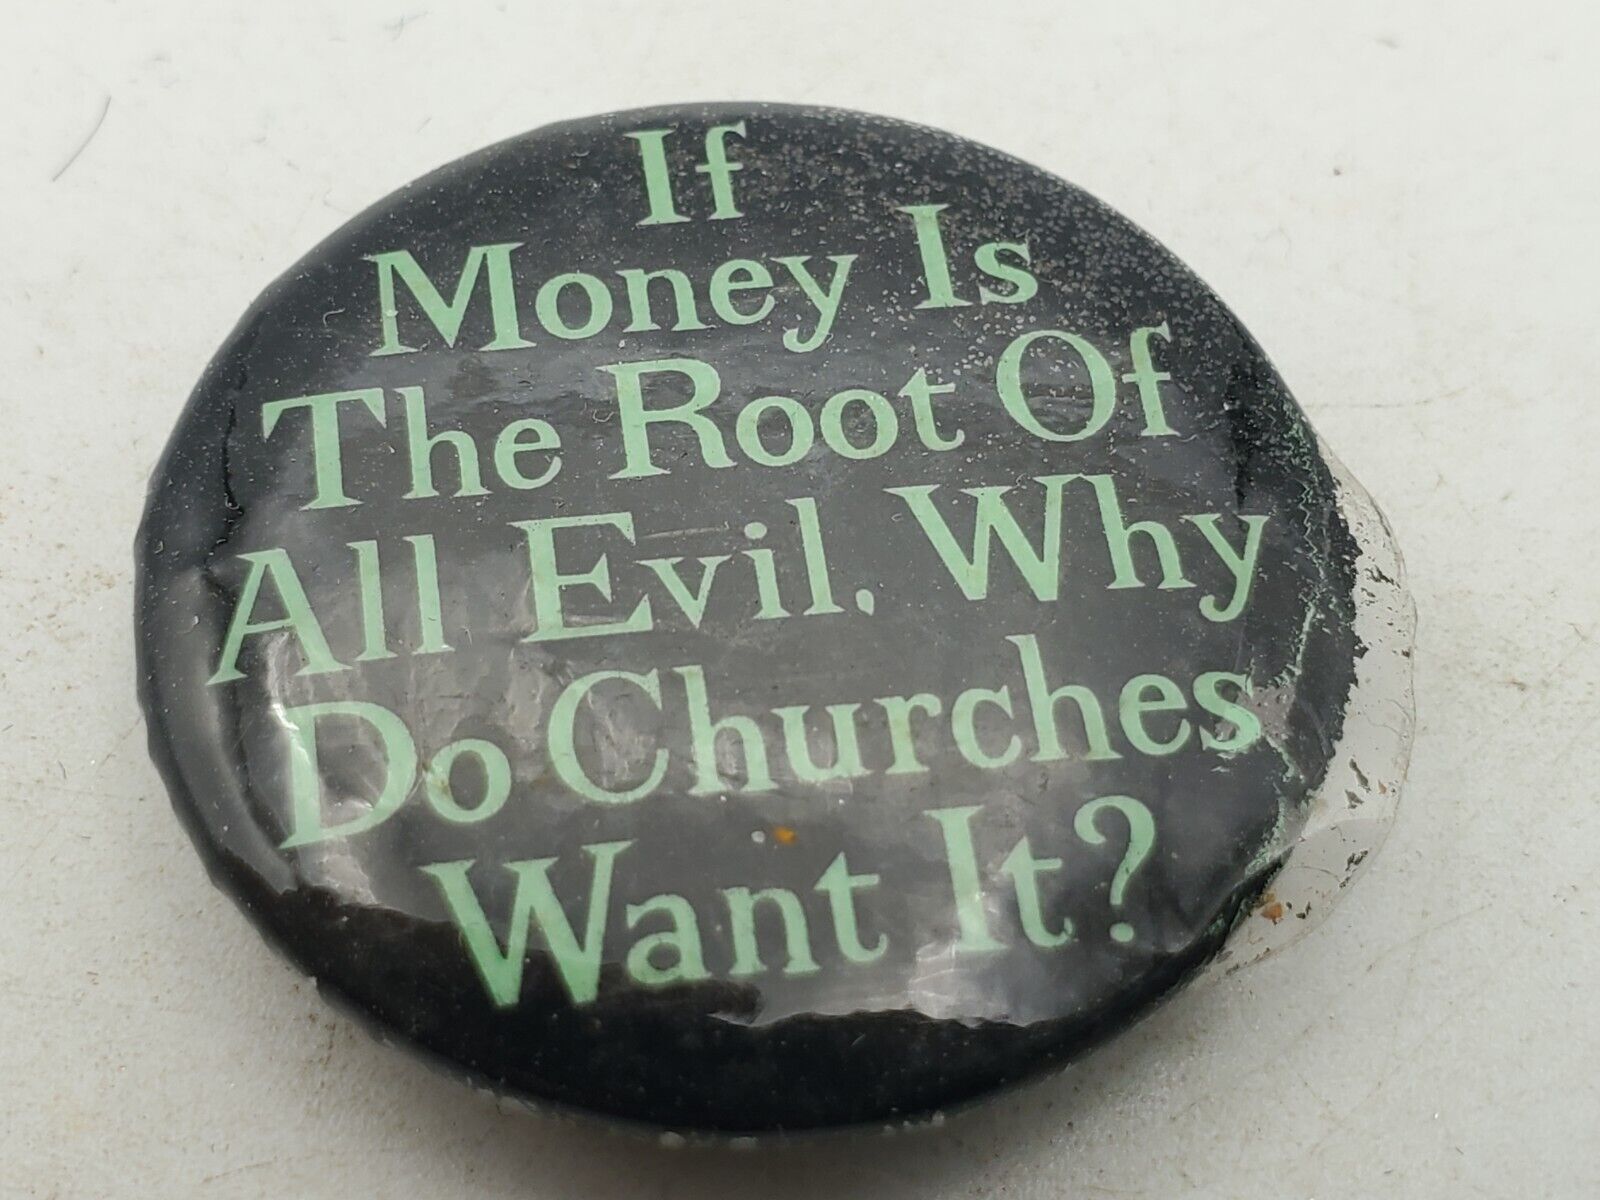 Vtg MONEY IS ROOT ALL EVIL WHY DO CHURCHES WANT IT? Button PIn Pinback As Is S1